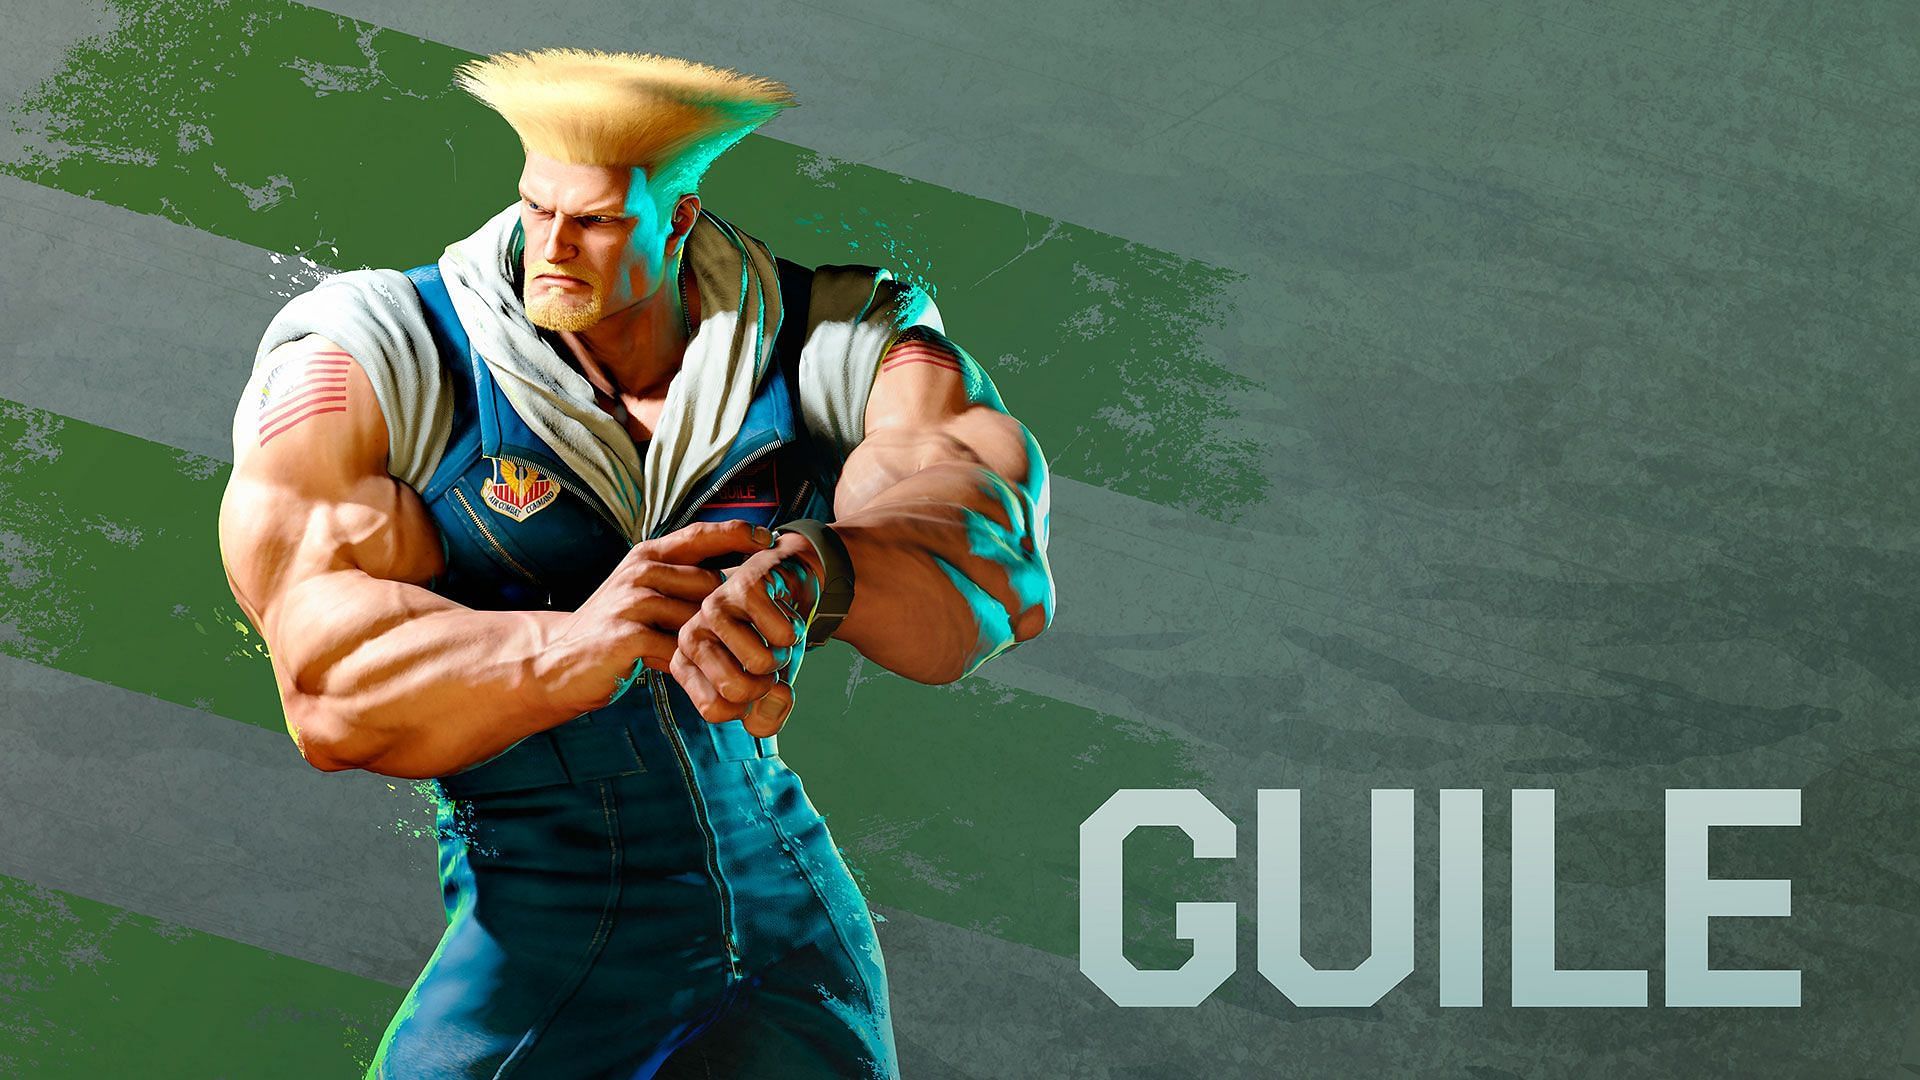 Guile enters a new phase in the Street Fighter timeline after destroying Shadaloo (Image via Street Fighter)